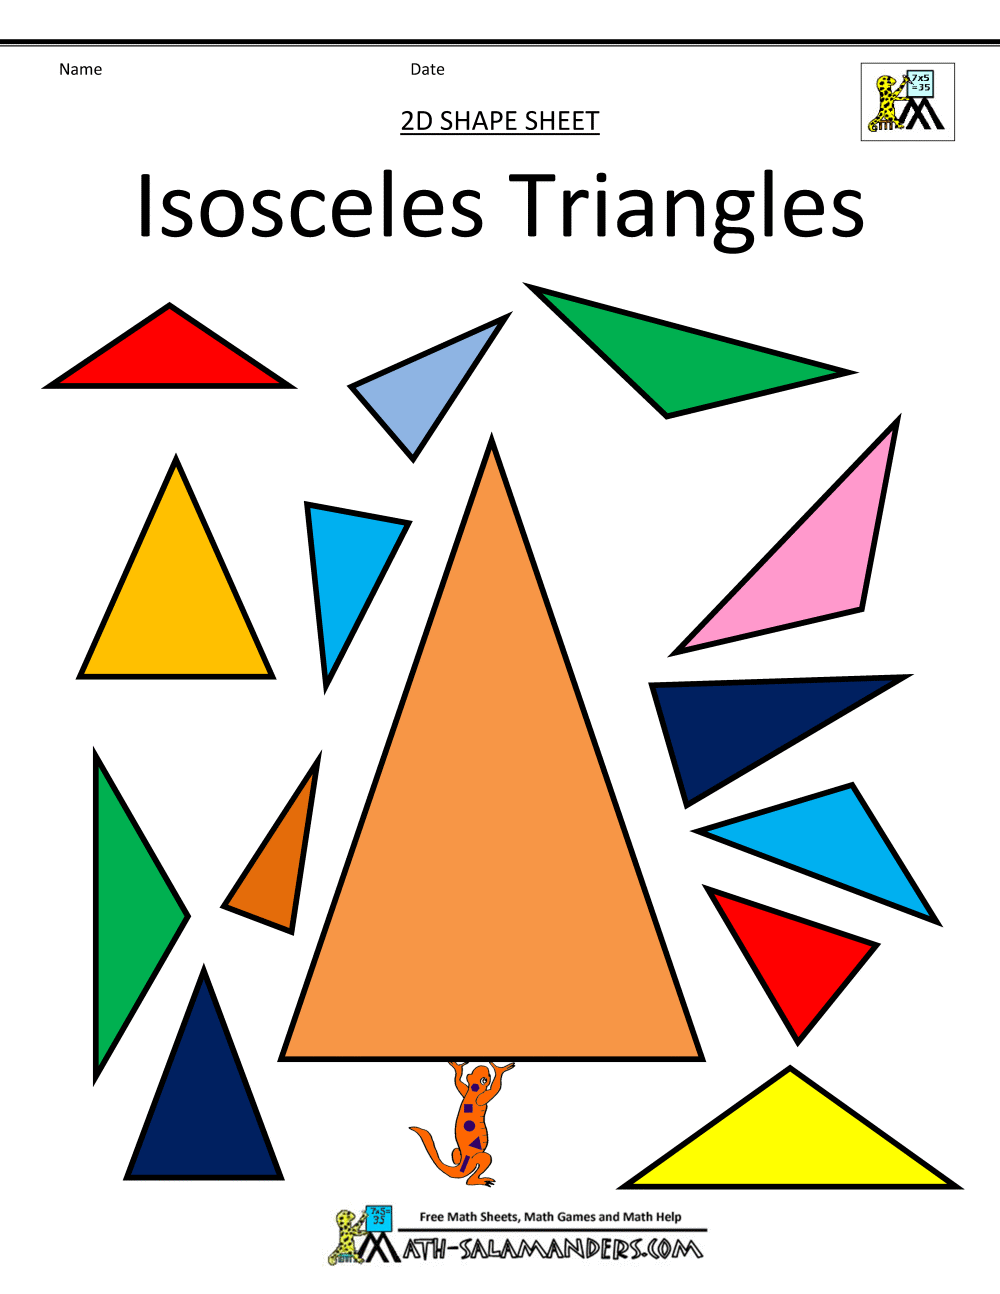 triangle objects clipart - photo #48